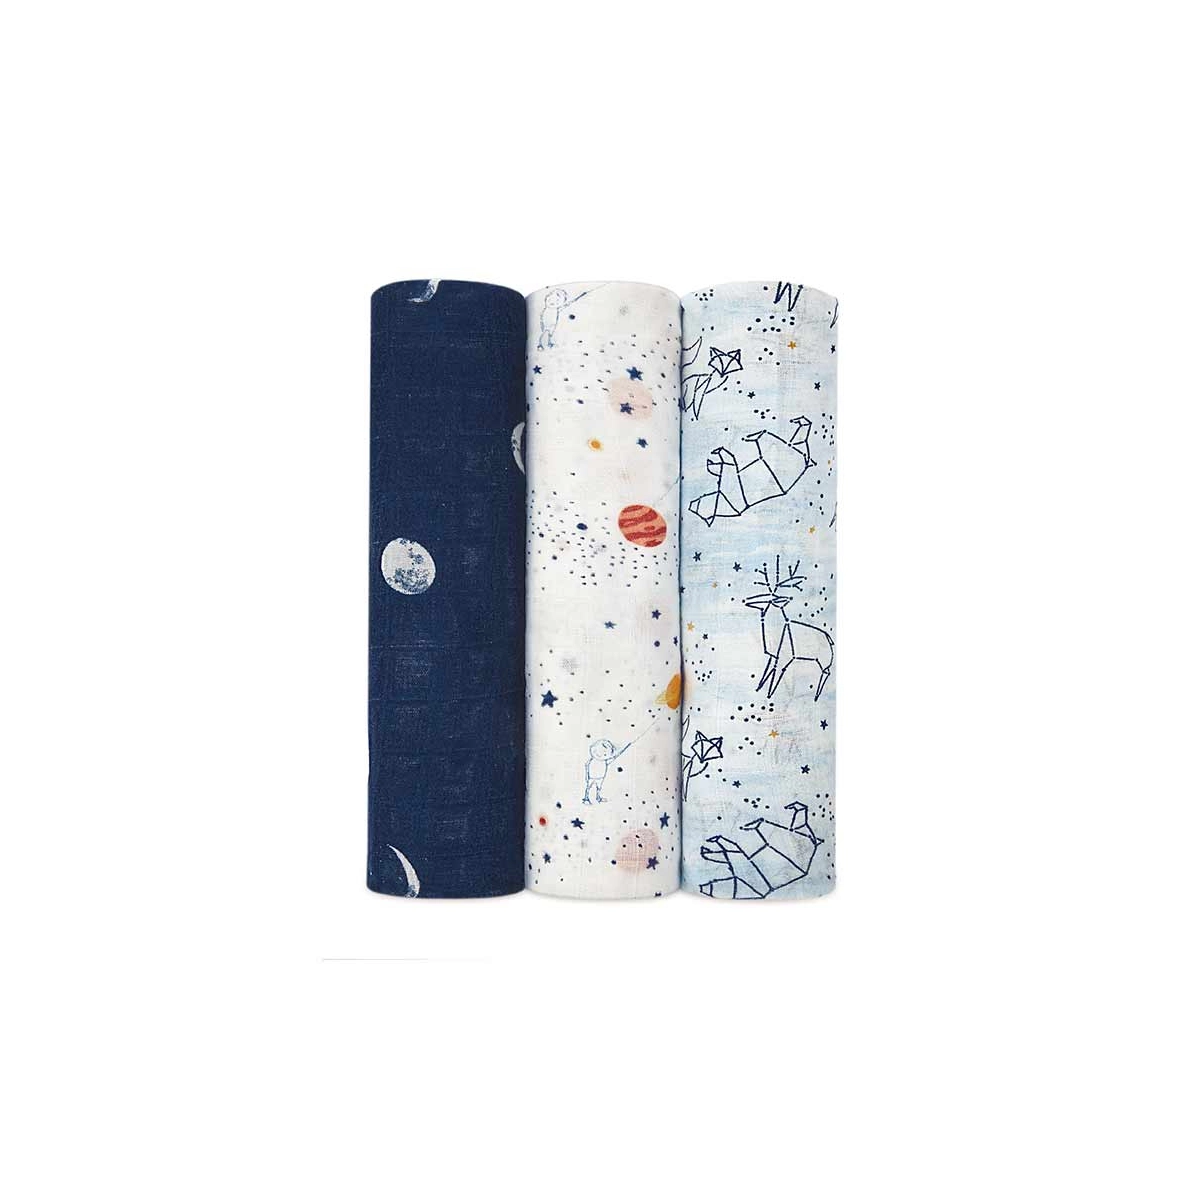 Image of Aden + Anais Pack of 3 Large Swaddle Silky Soft - Stargaze (23-19-071)